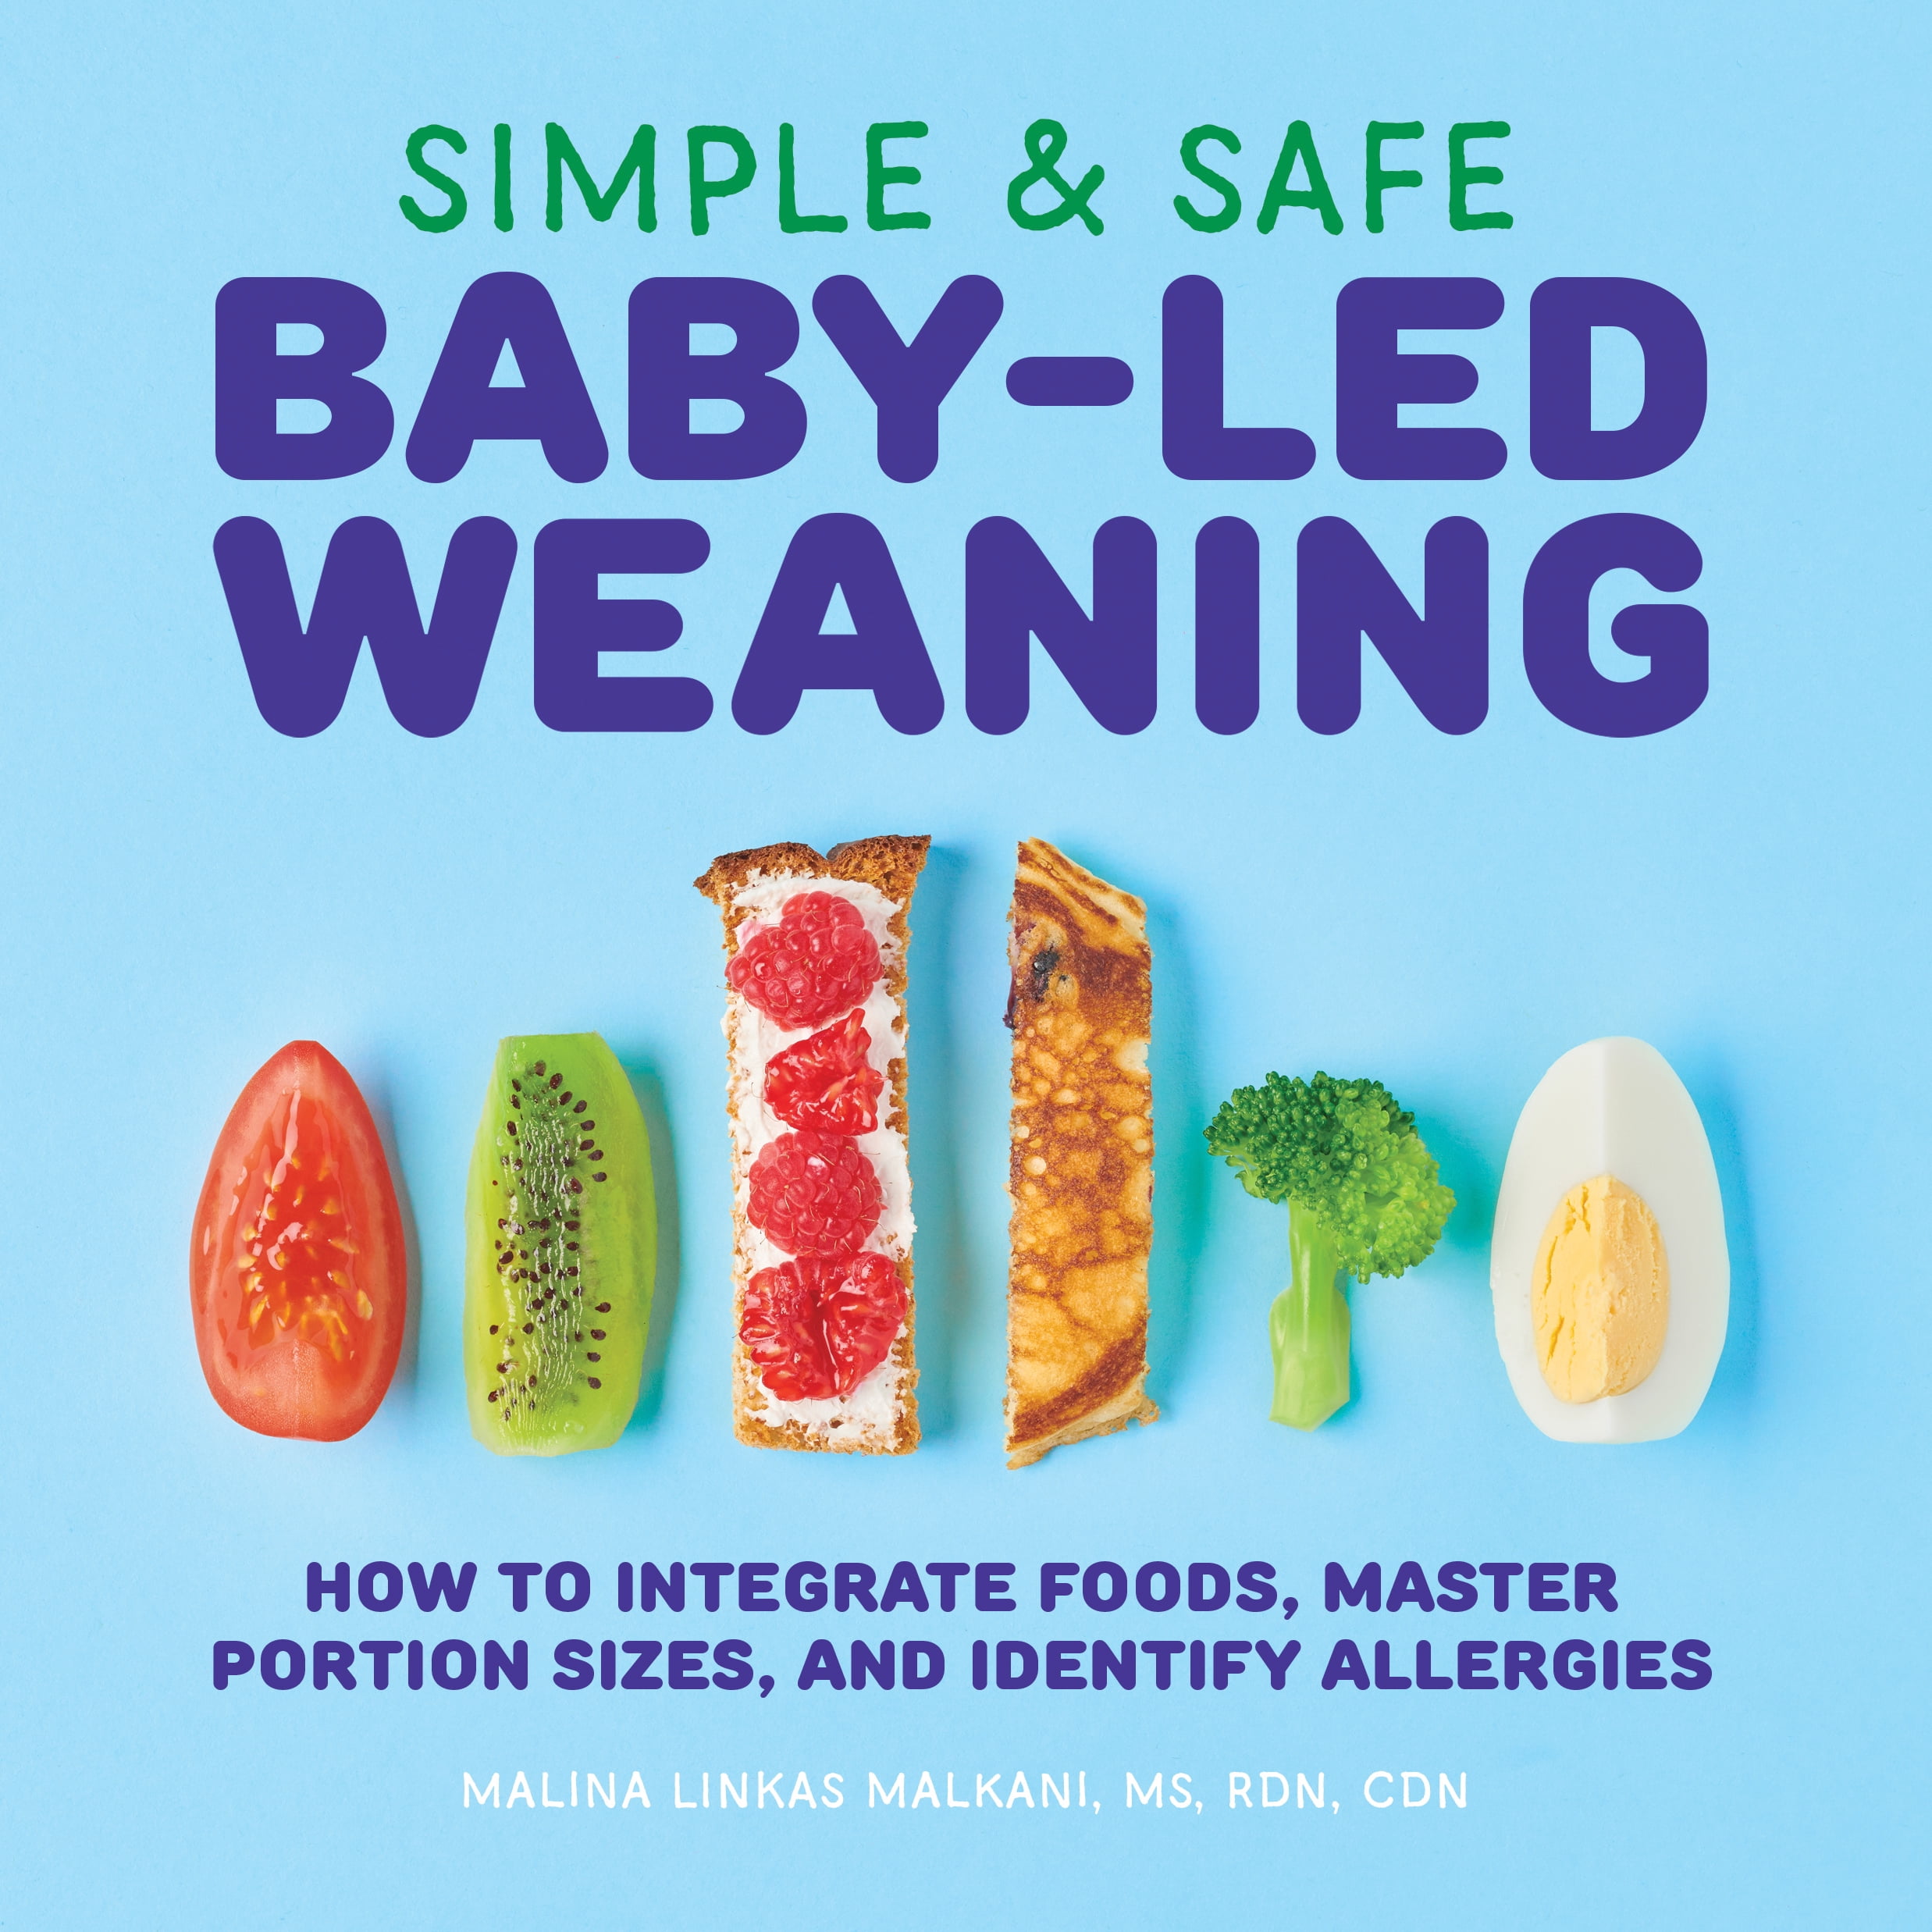 10 Baby Led Weaning Must-Haves - Family Style Nutrition